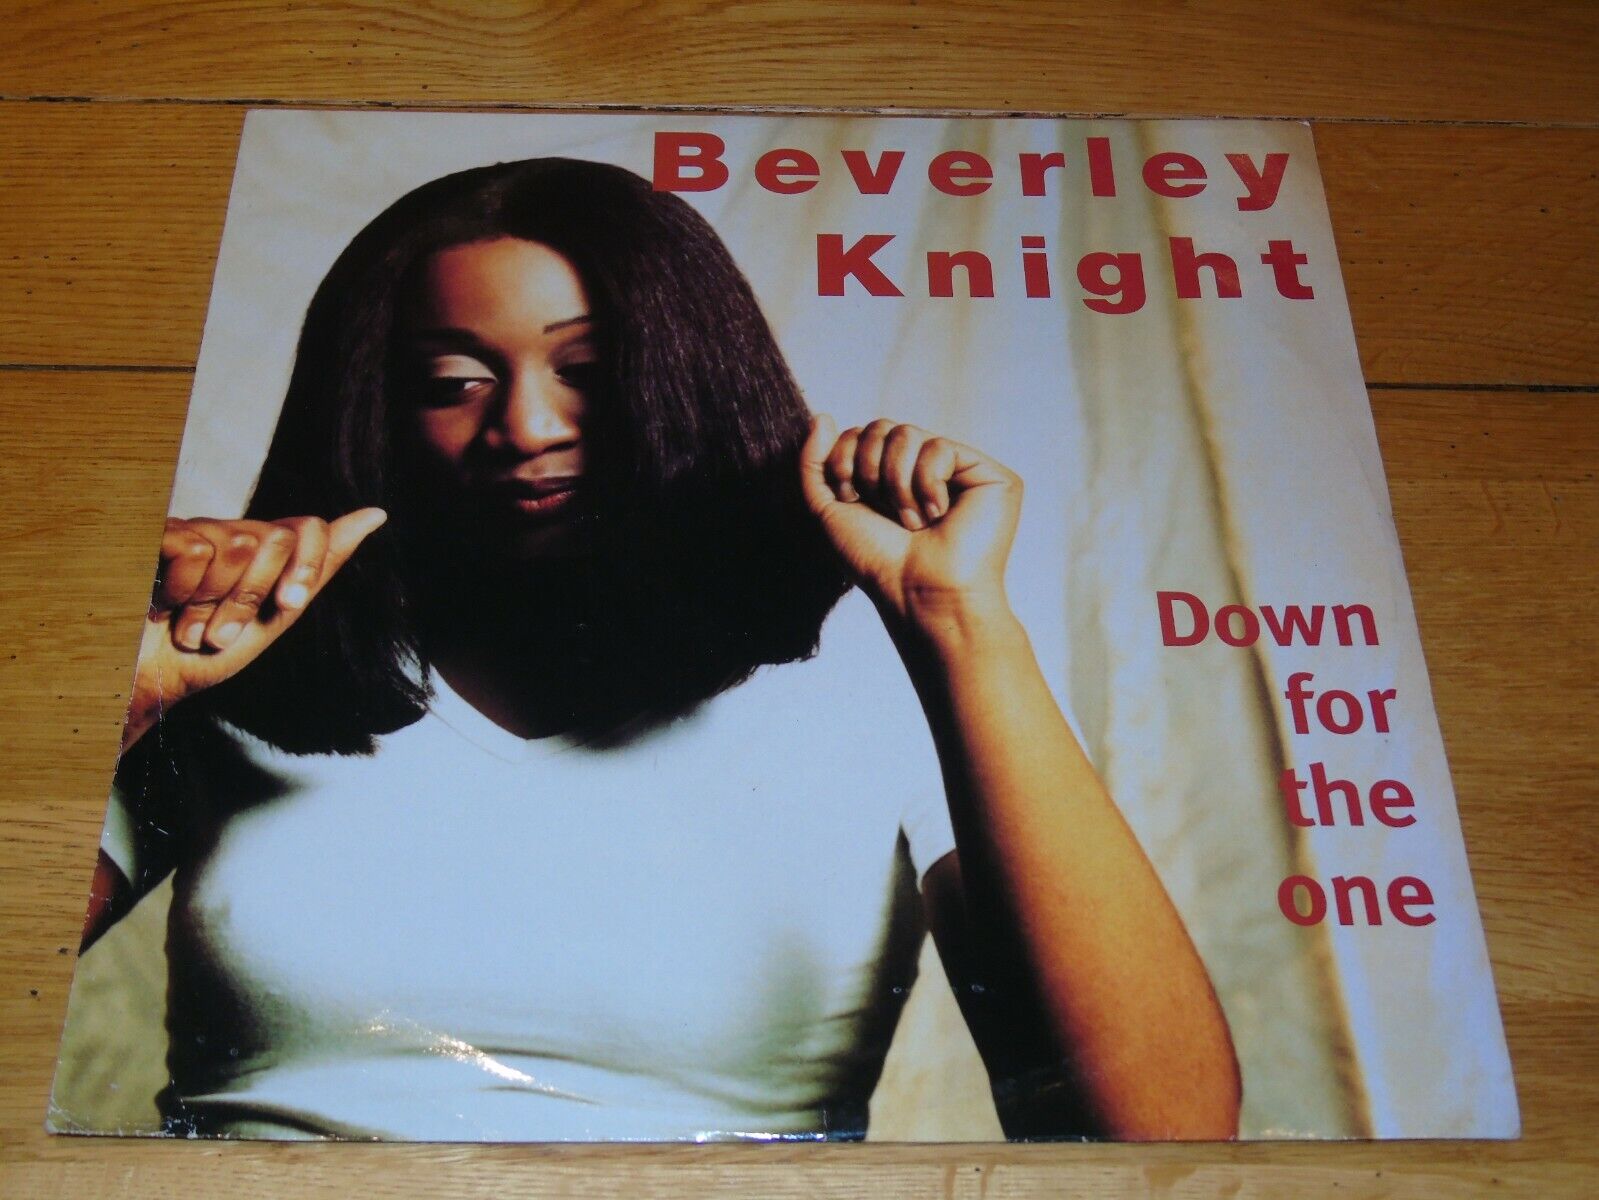 BEVERLEY KNIGHT - Down For The One - 1995 UK 4-track 12" vinyl single